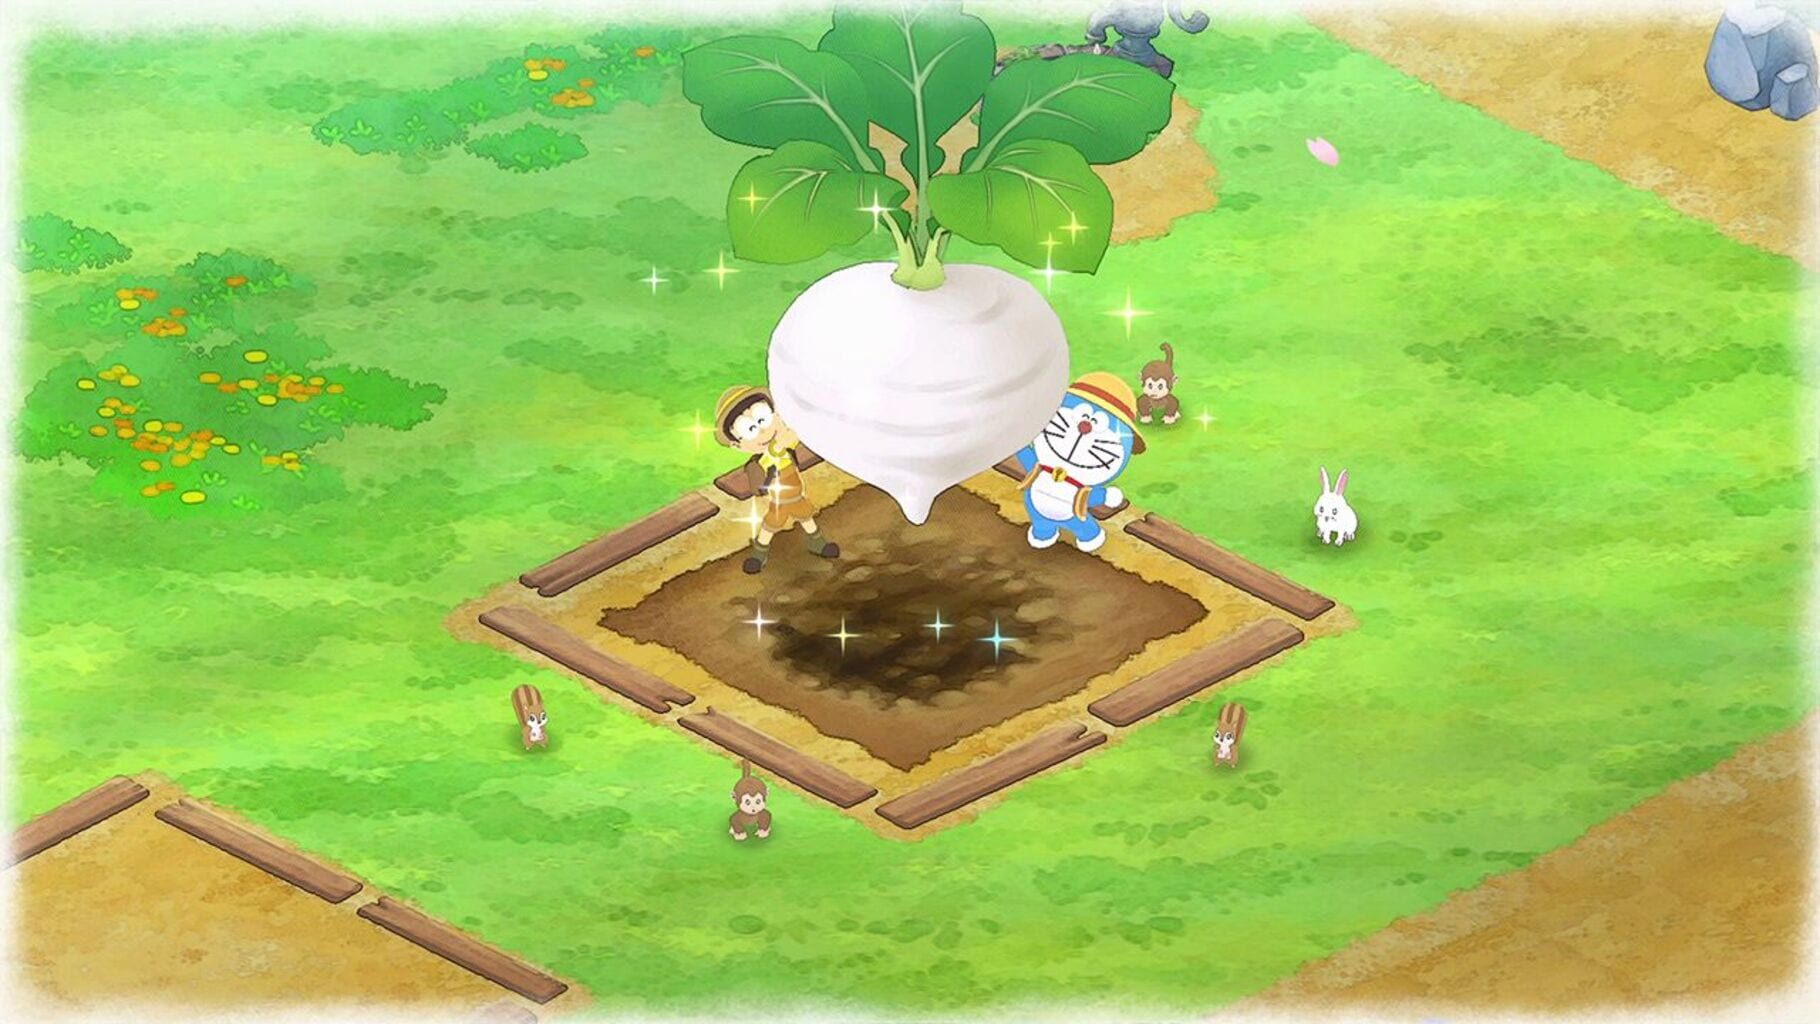 Doraemon Story of Seasons: Friends of the Great Kingdom - Special Edition screenshot